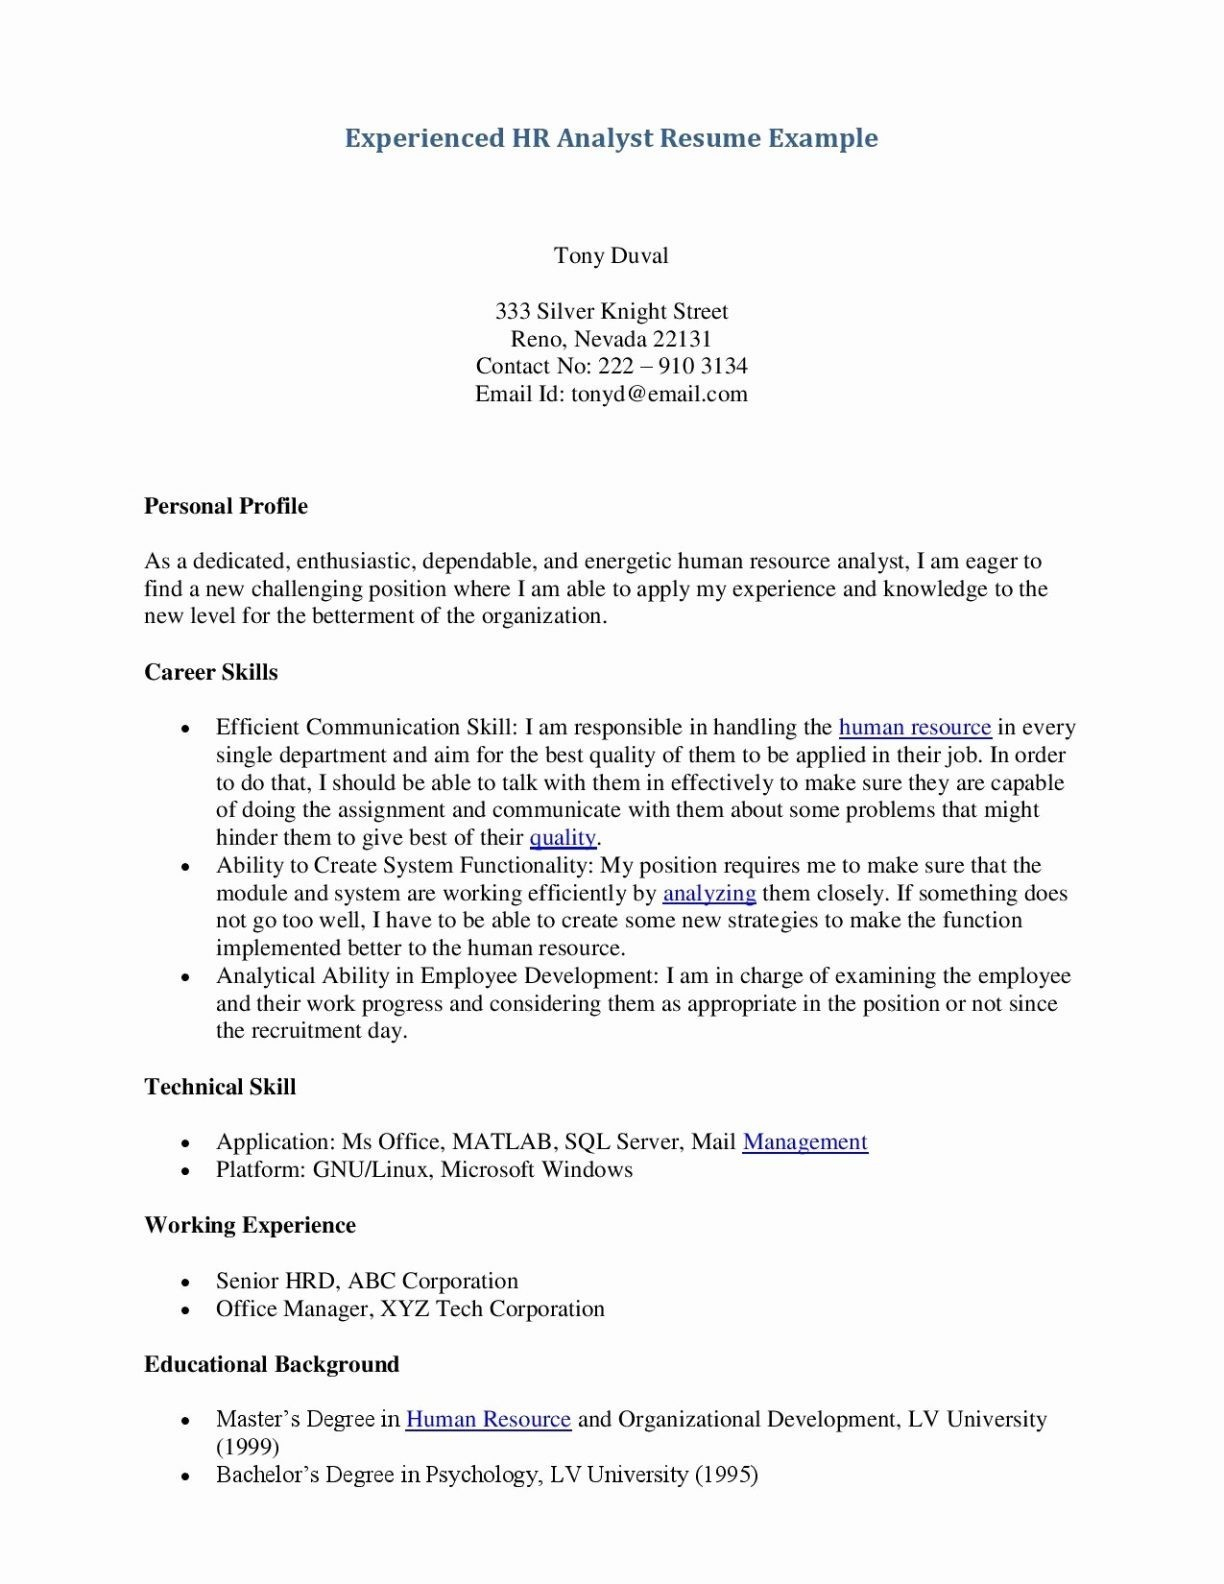 Rent Agreement Letter Template - Tenancy Agreement Renewal Template